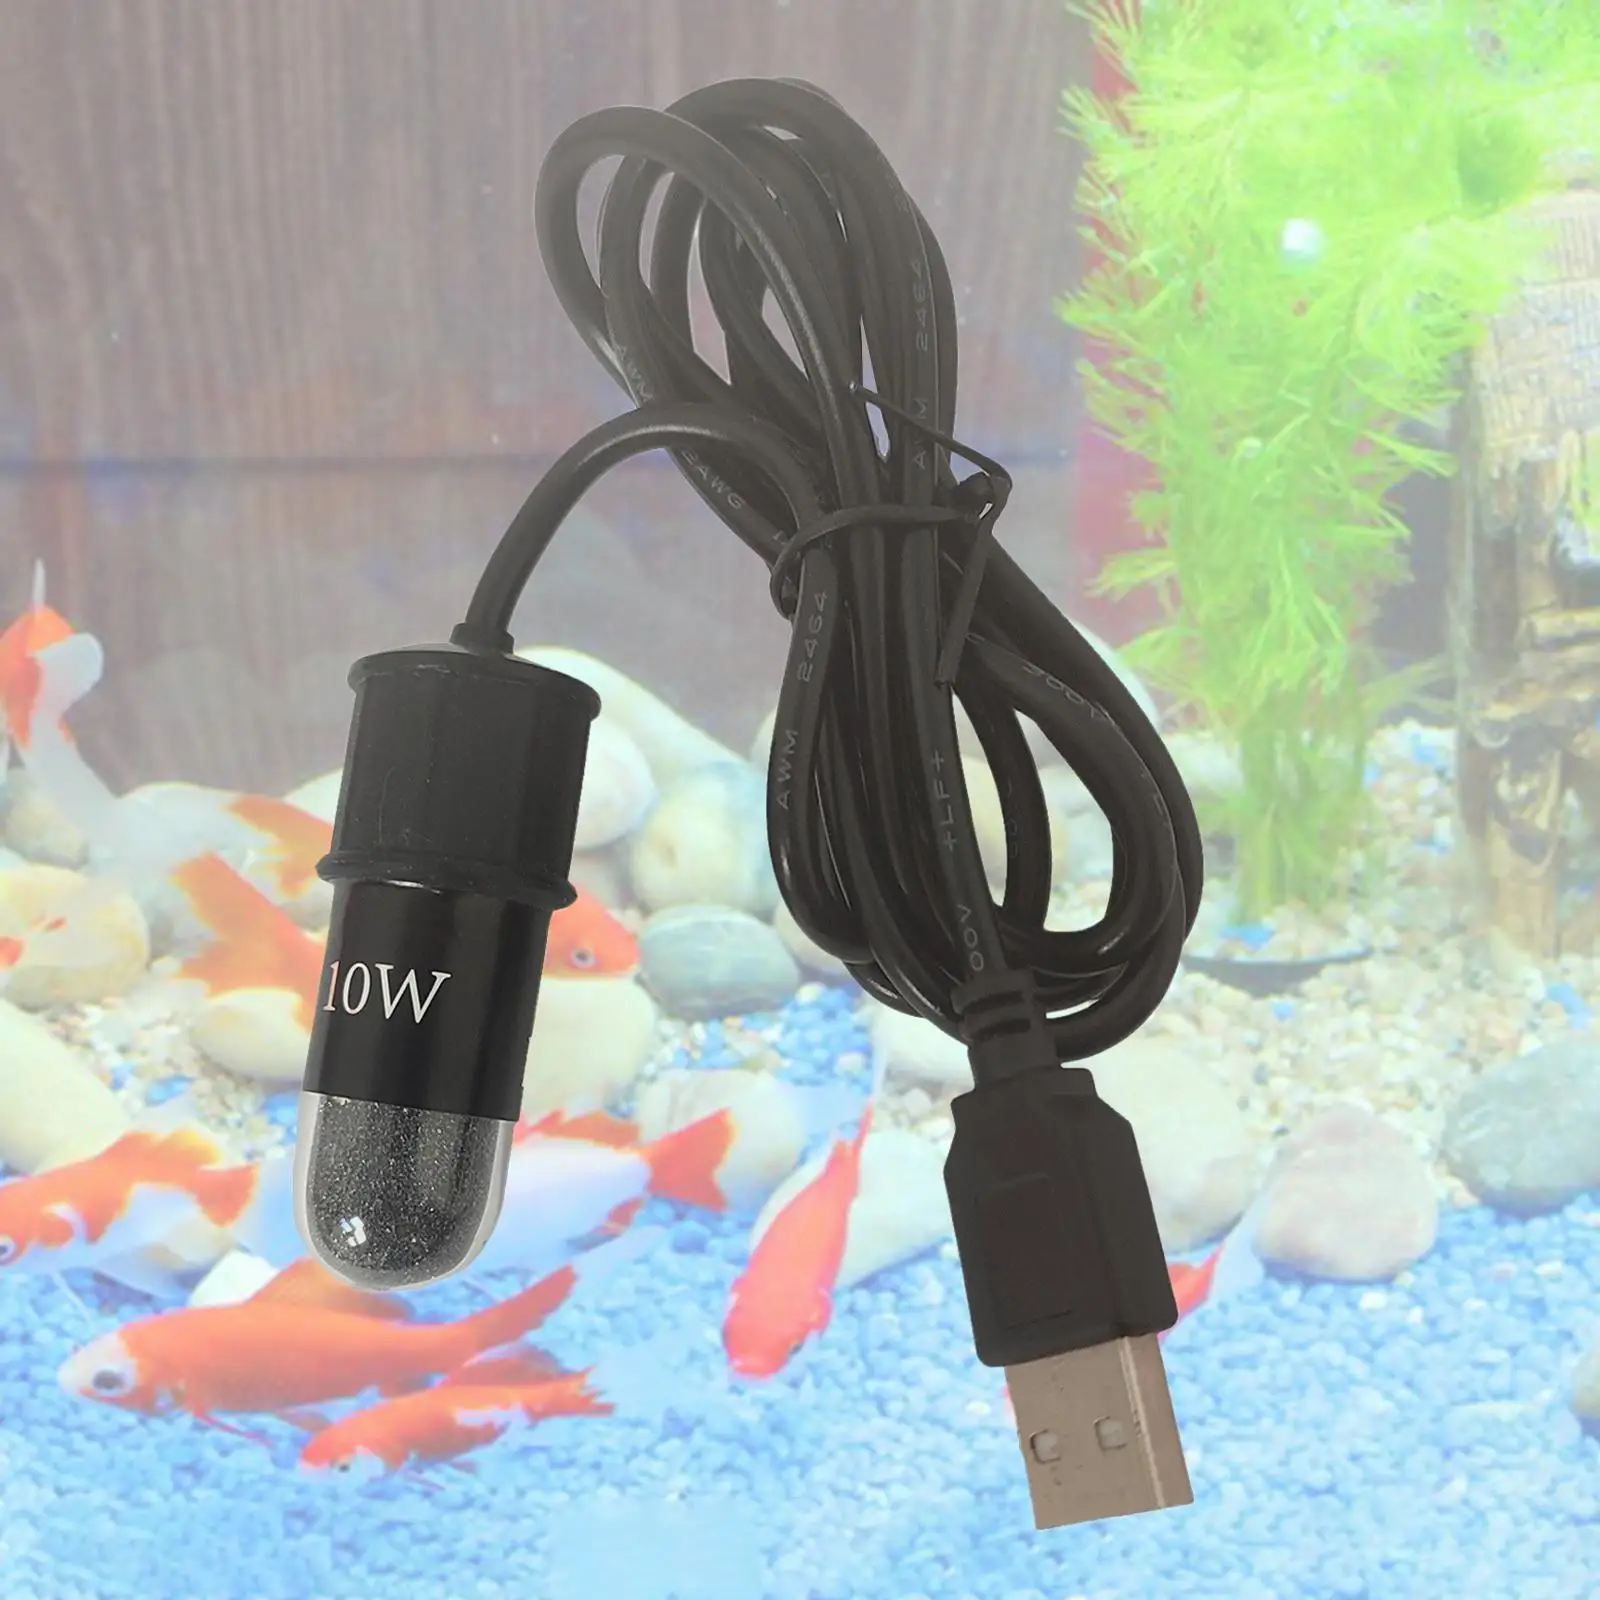 10W USB Aquarium Heater with Built in Thermometer LED USB Heating Rod LED Display for 5/10/20 gallons Mini Fish Tank Heater